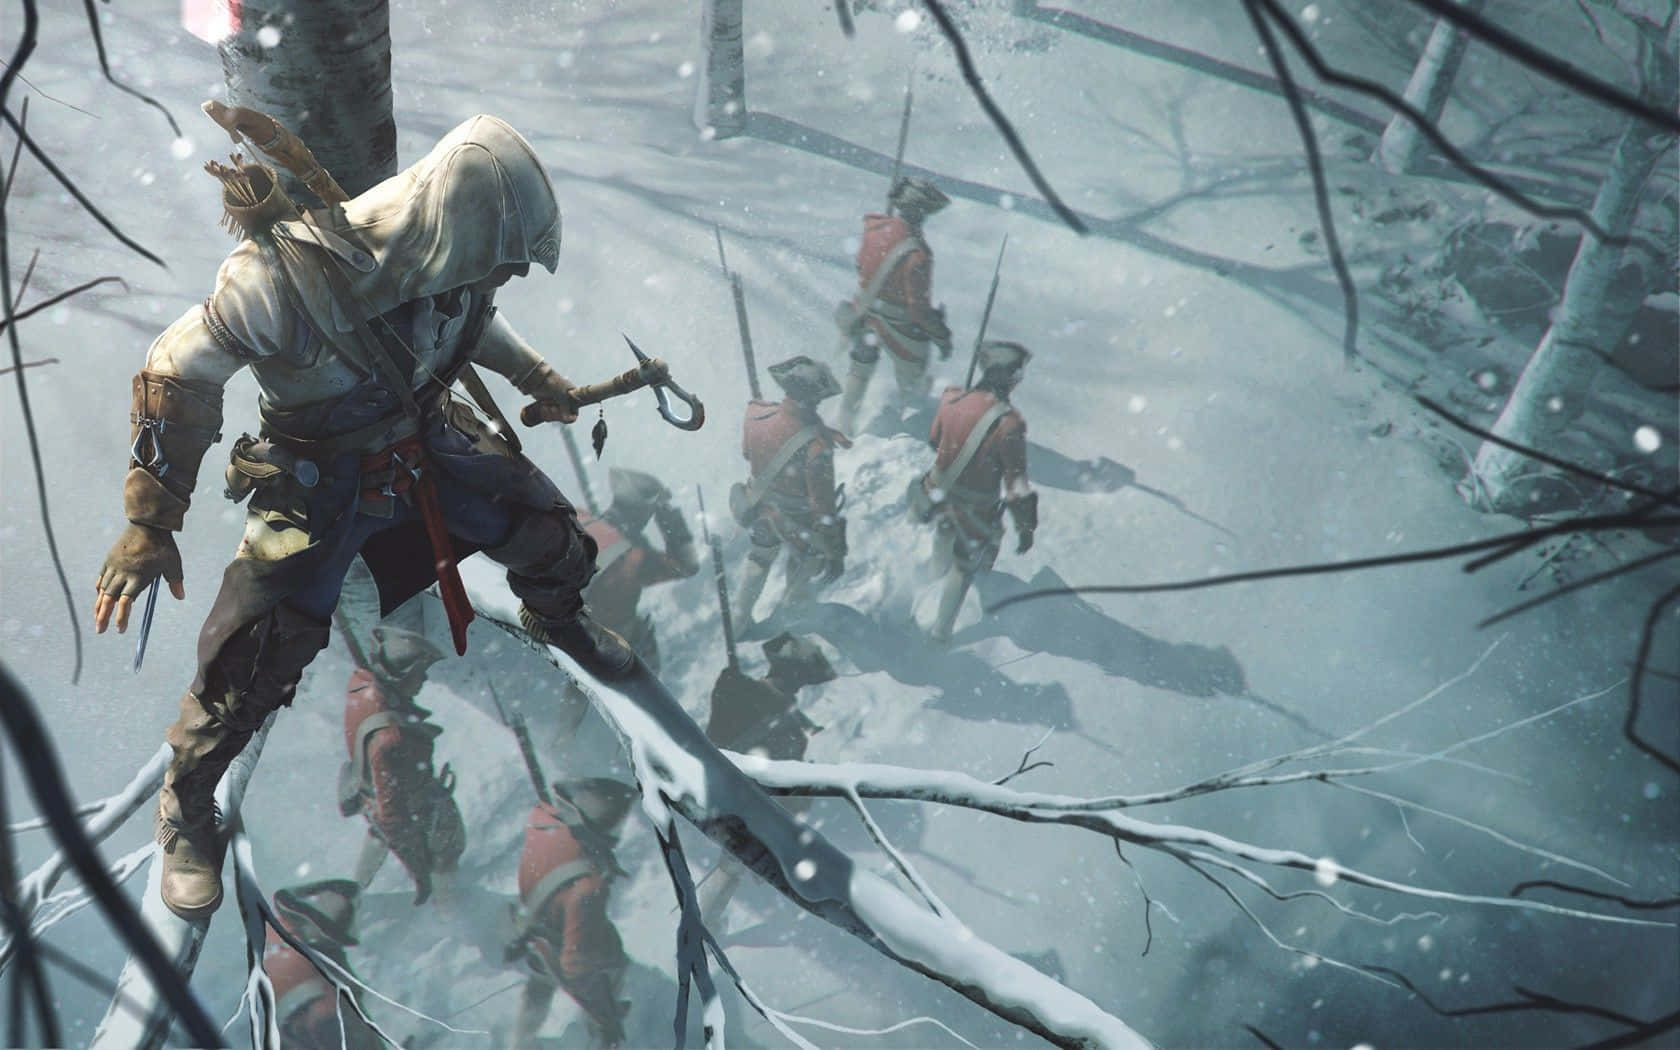 Connor Kenway bravely stands in the Assassin's Creed III scene Wallpaper